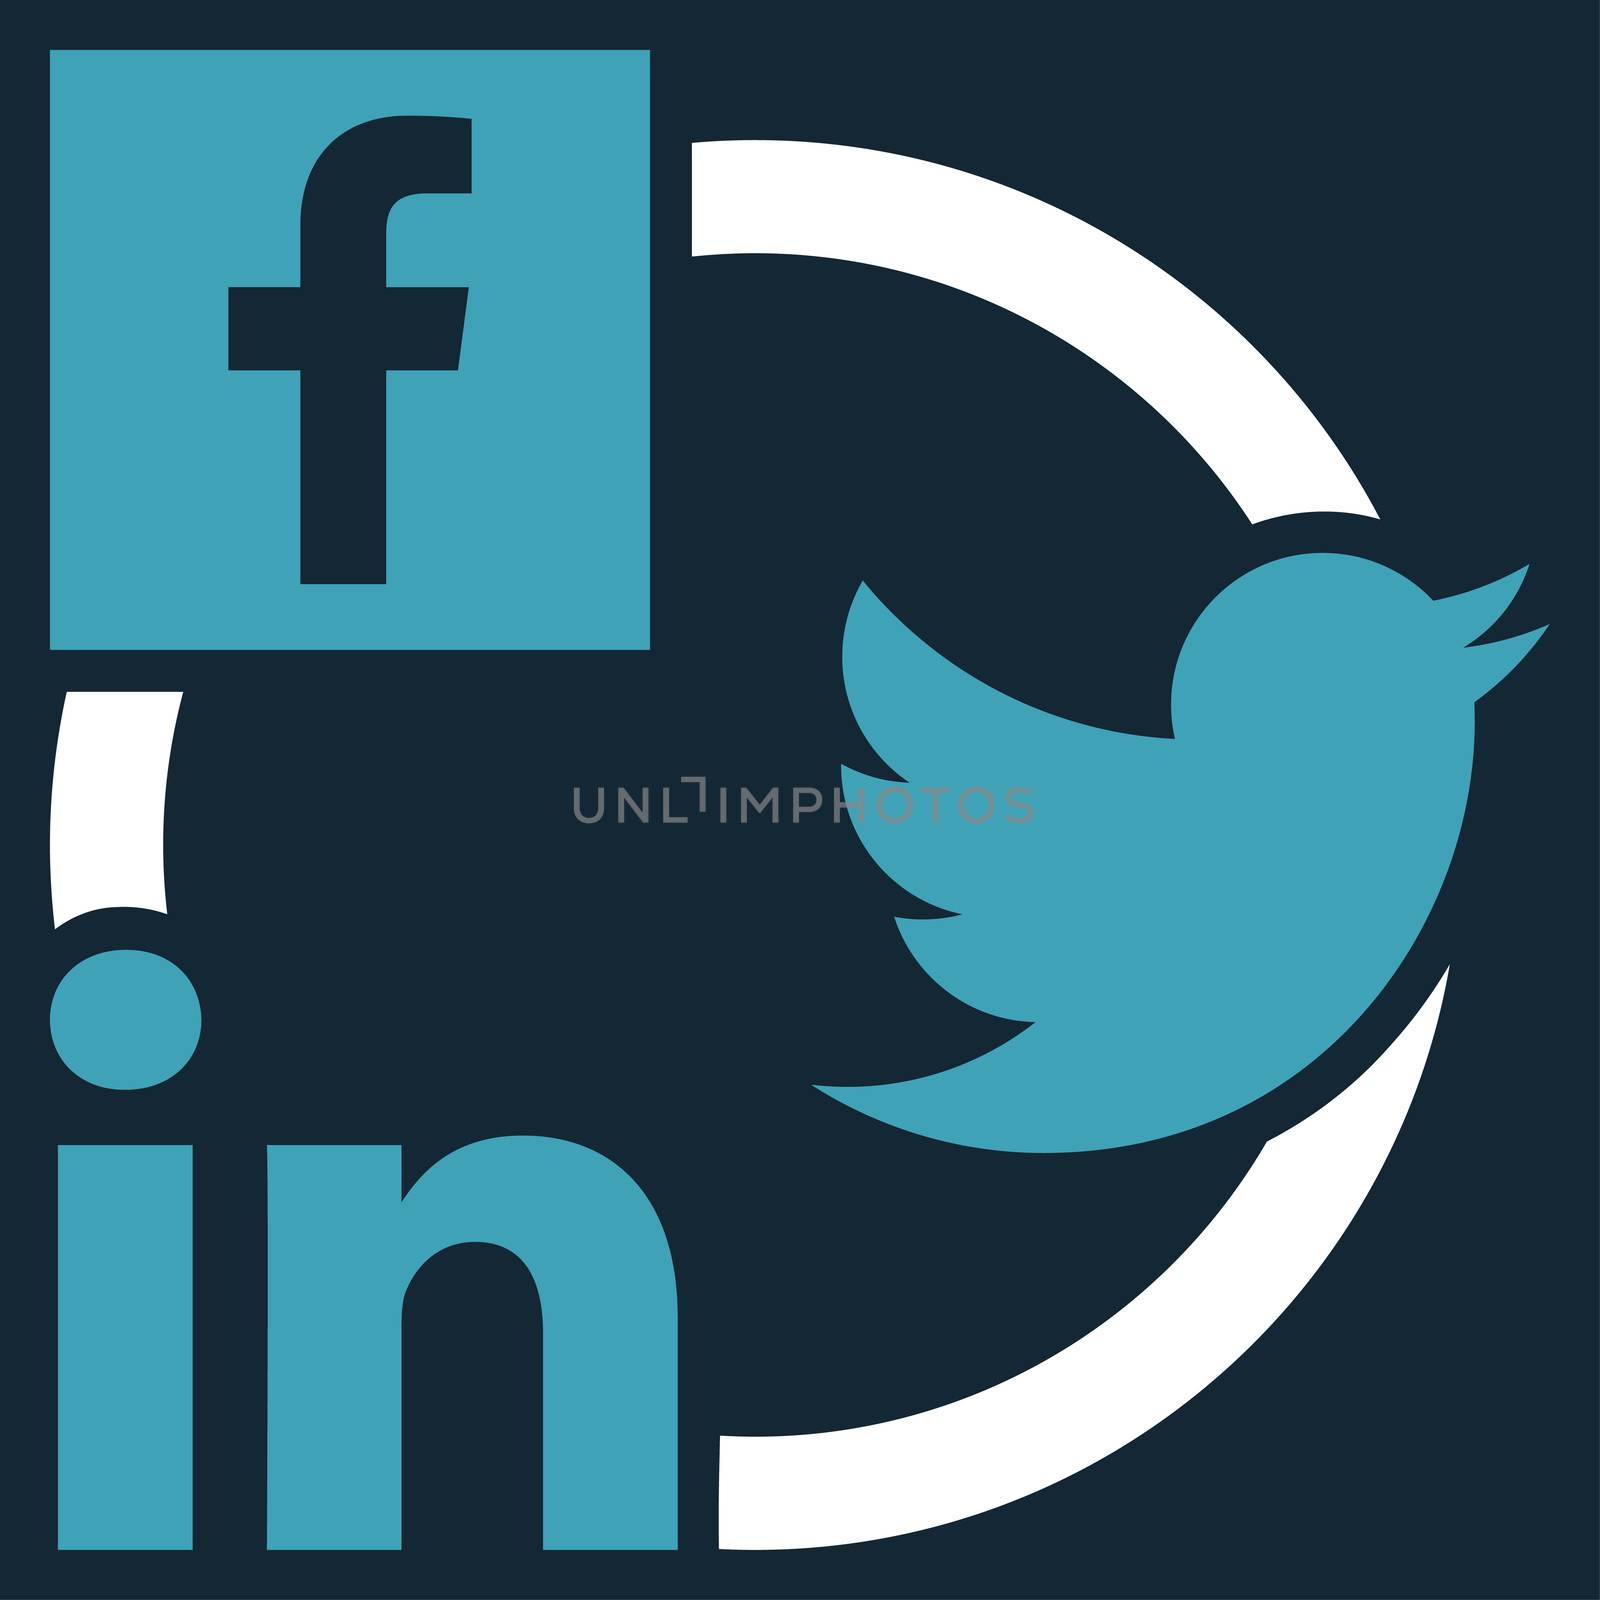 Social Networks Icon. This flat glyph symbol uses blue and white colors, and isolated on a dark blue background.